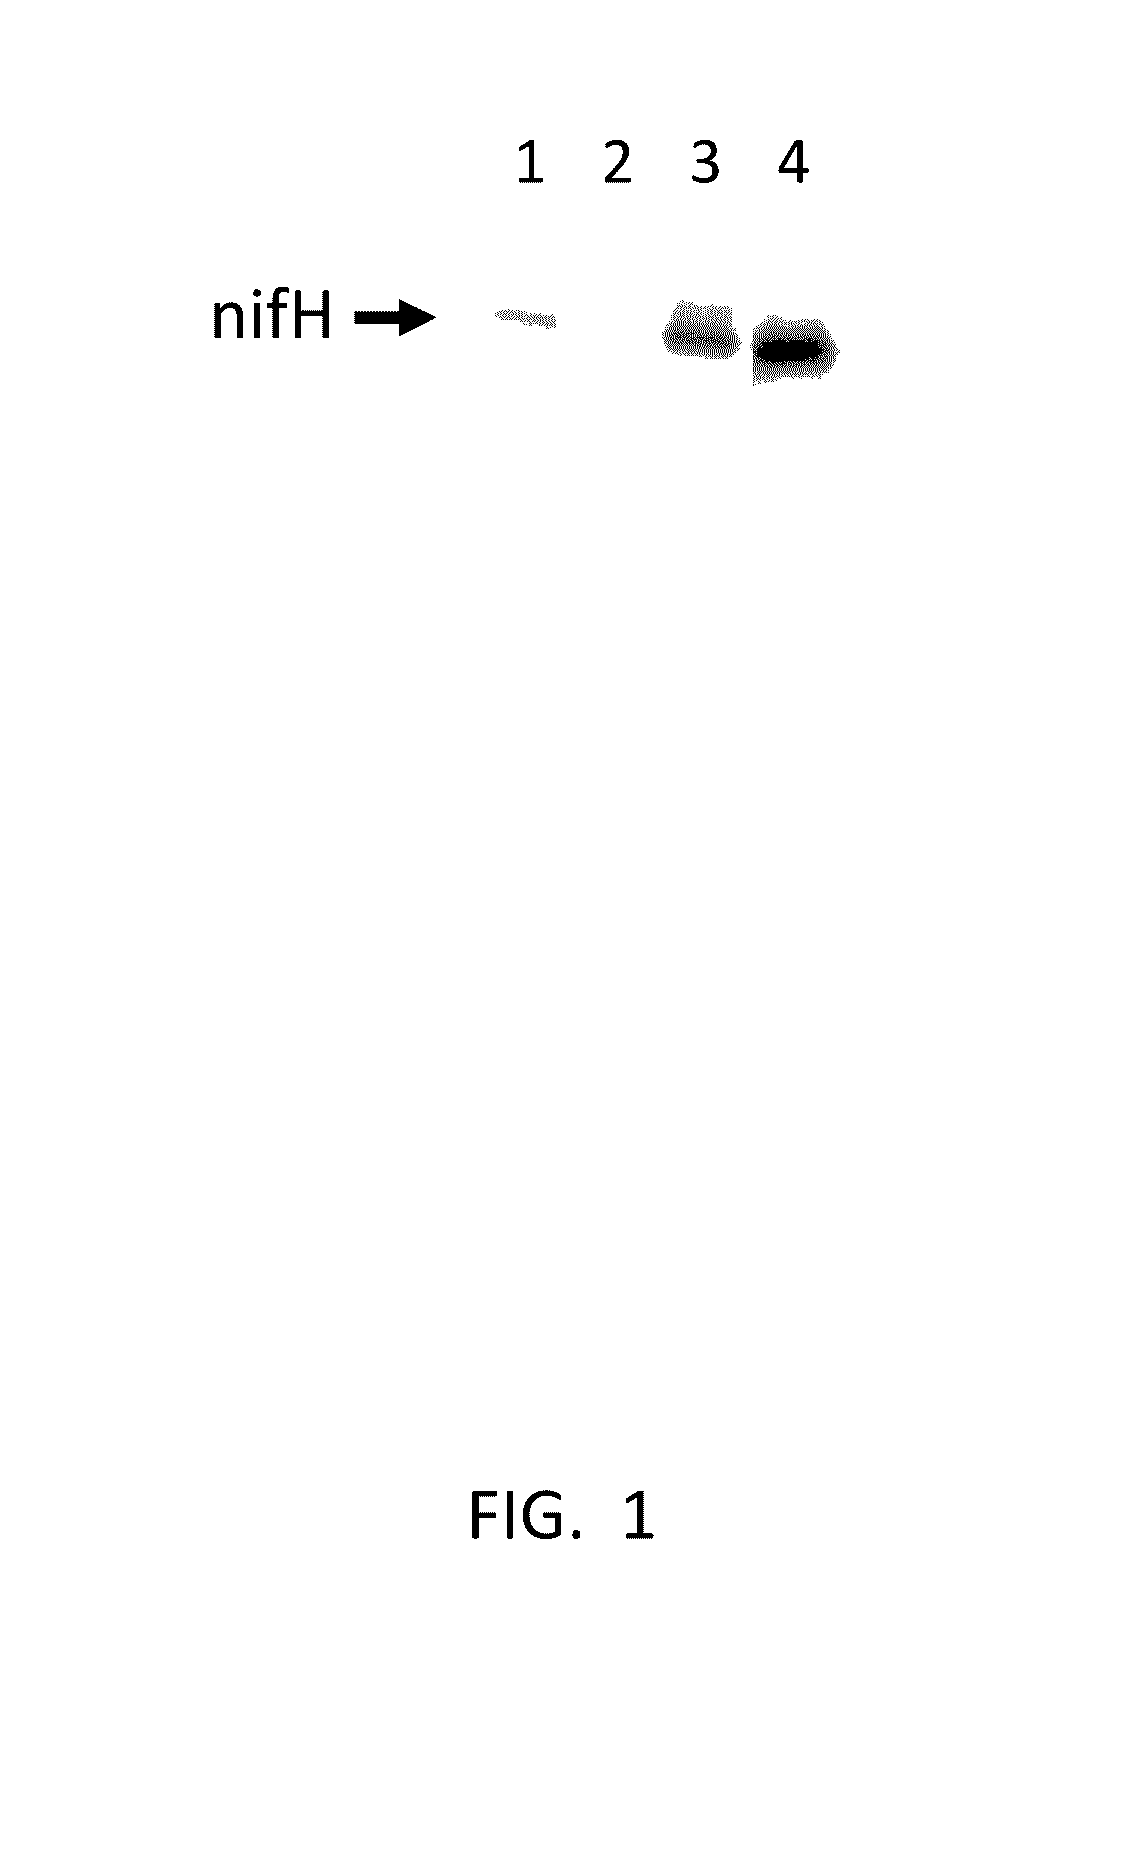 Compositions and methods for expression of nitrogenase in plant cells